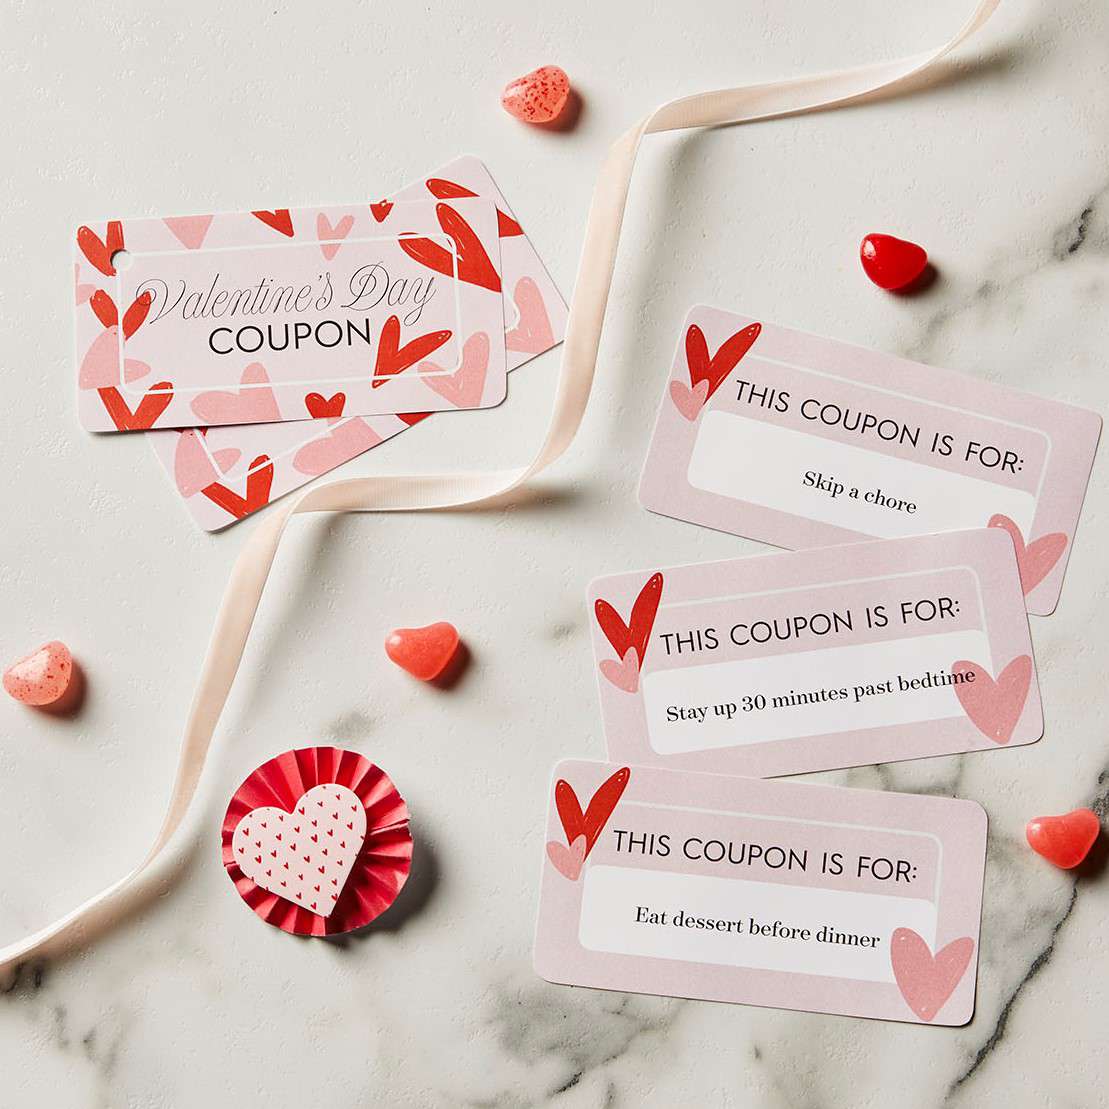 paper valentine's day coupons on a marble surface with pink and red candy